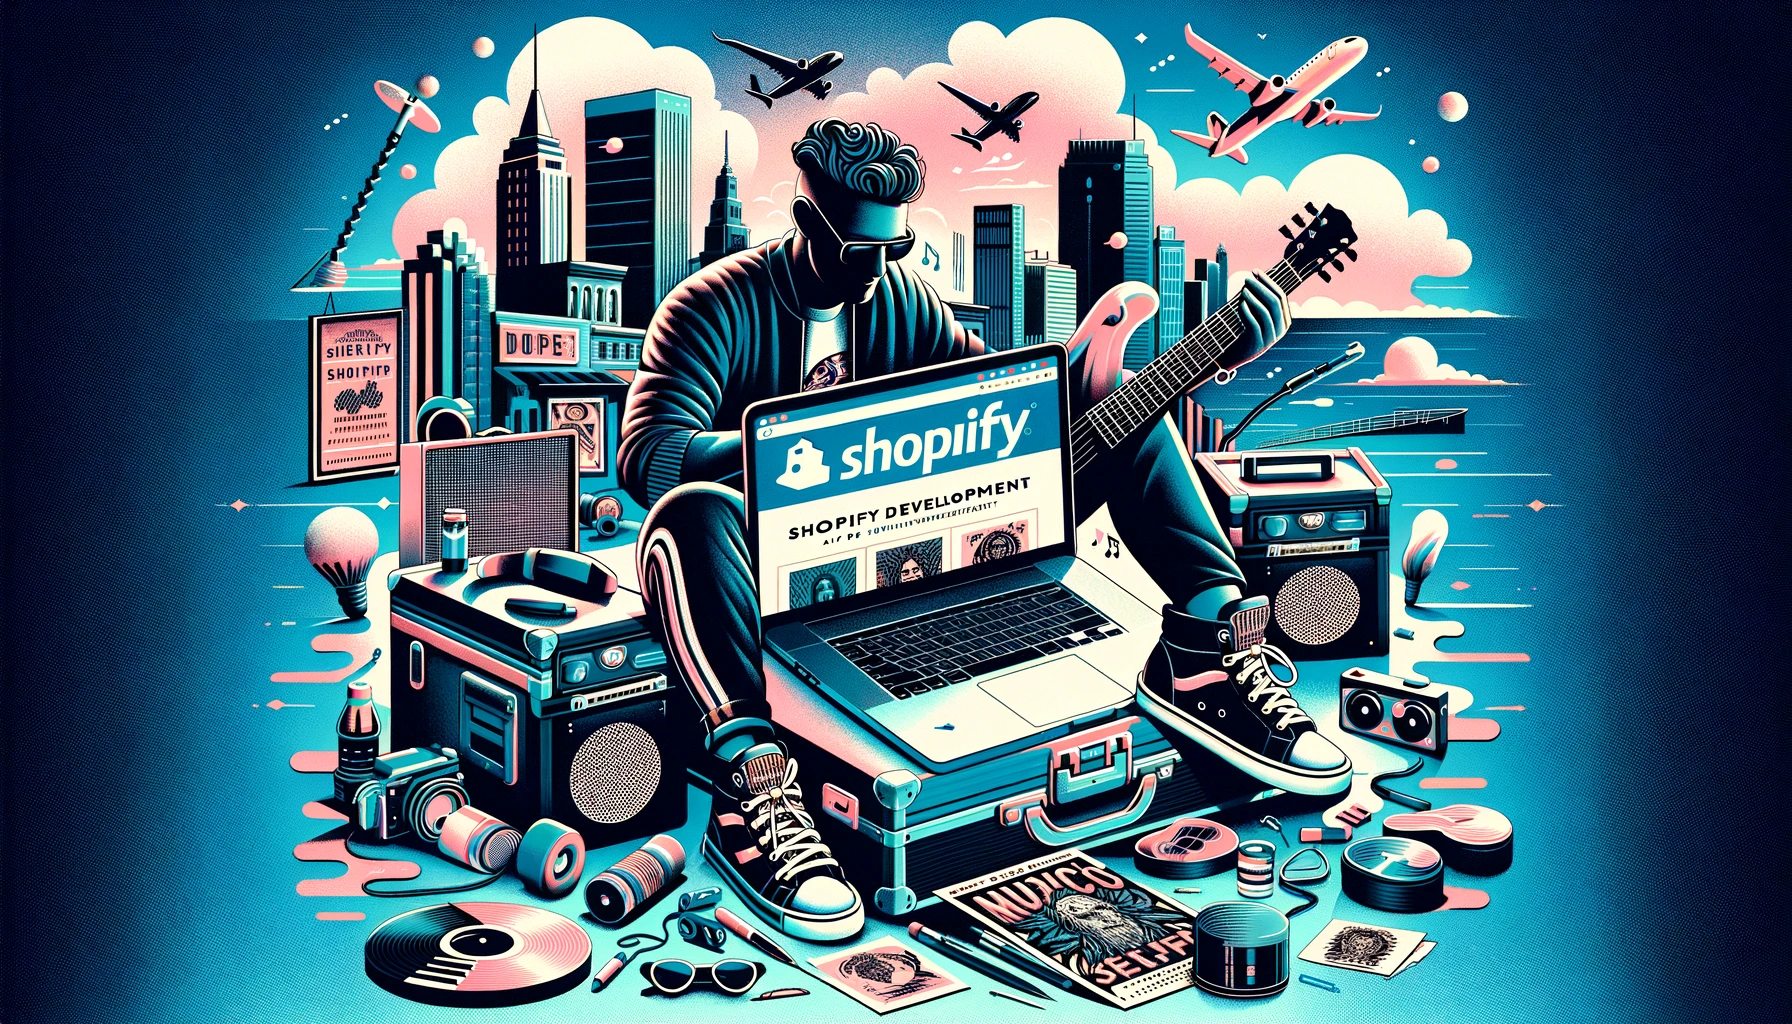 "Custom Shopify Development For The Music Industry by DTC Developers"